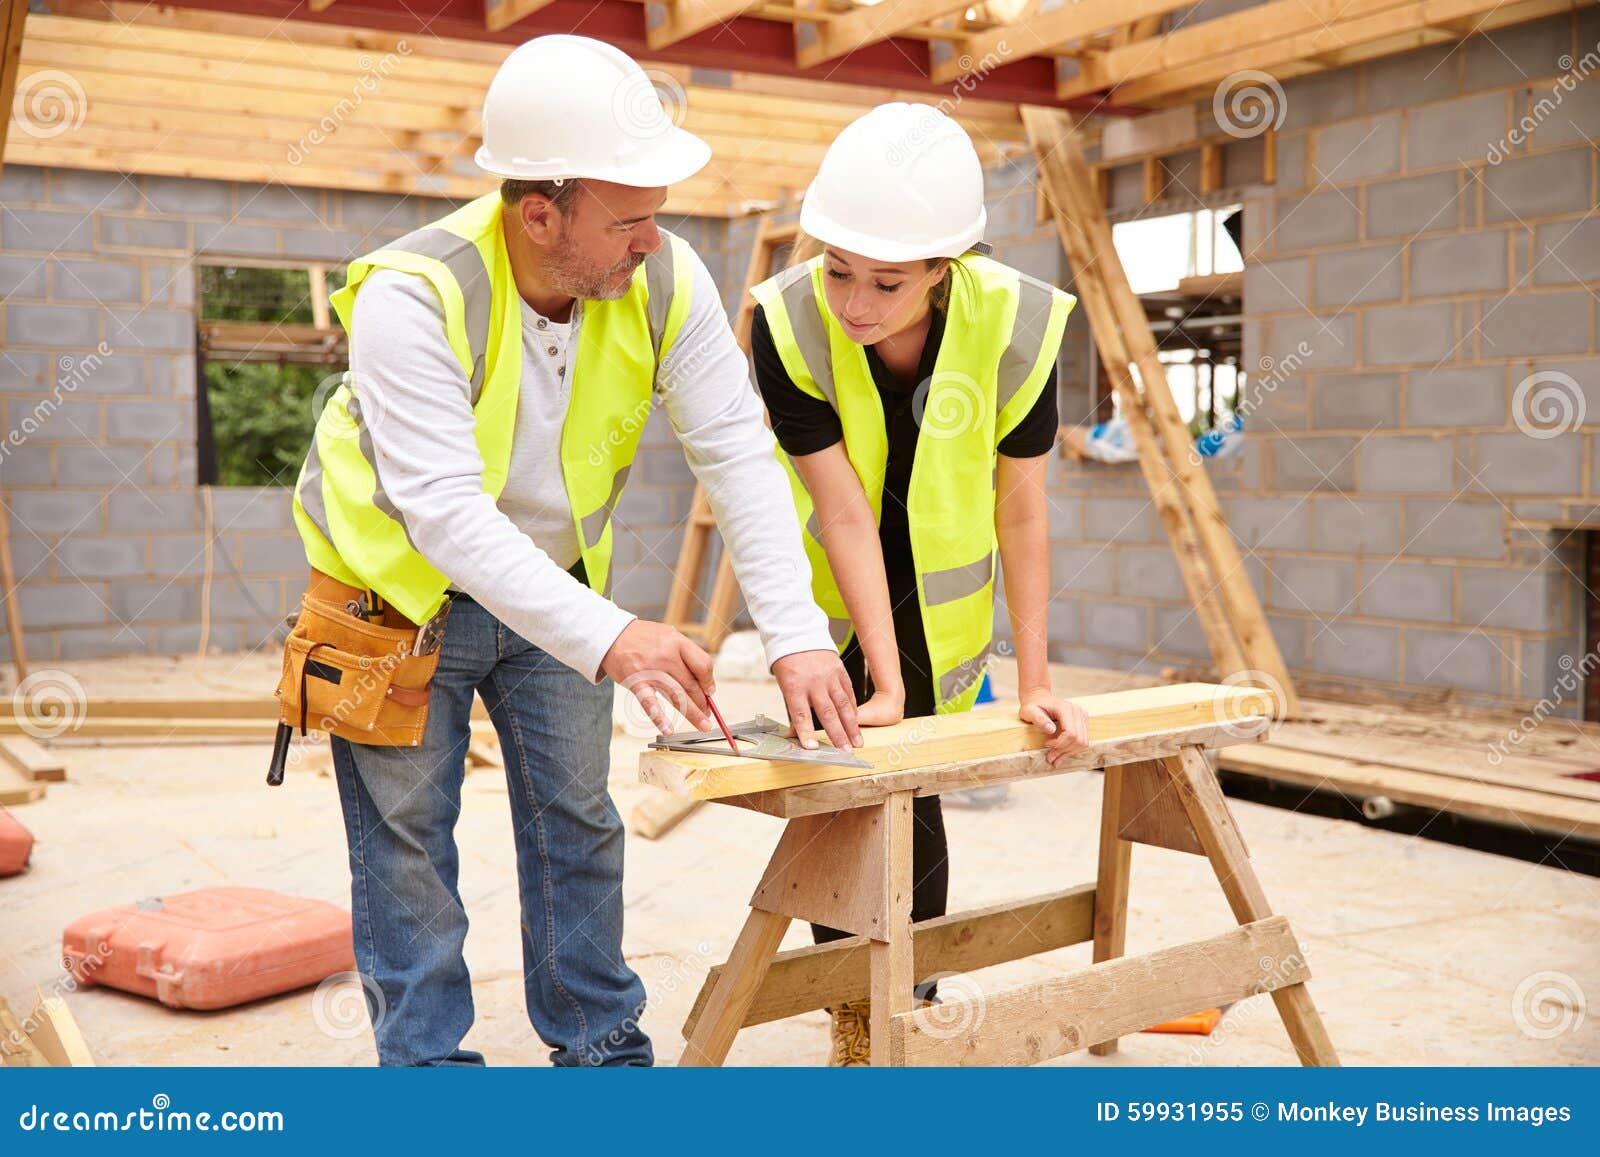 carpenter with female apprentice working on building site